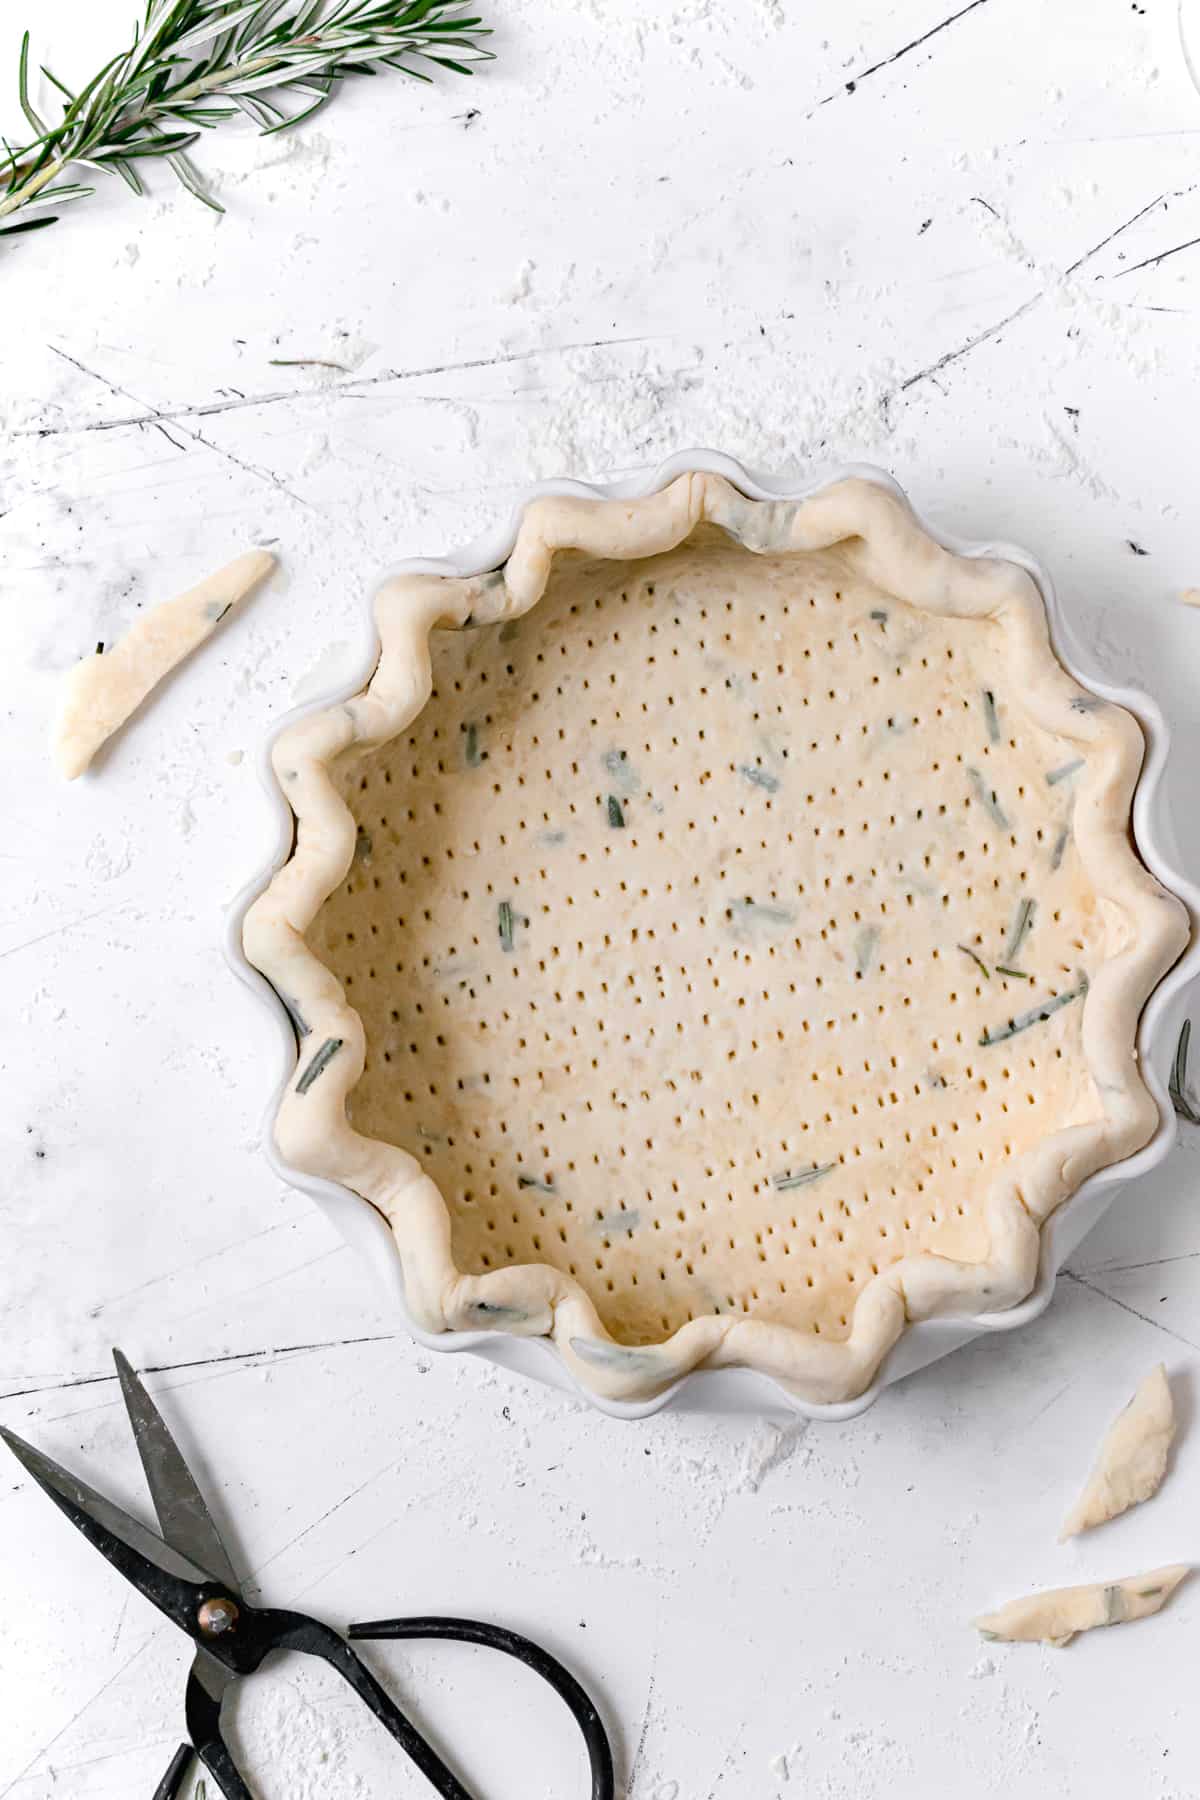 pie dough in white dish, with crimped edges and docked all over.